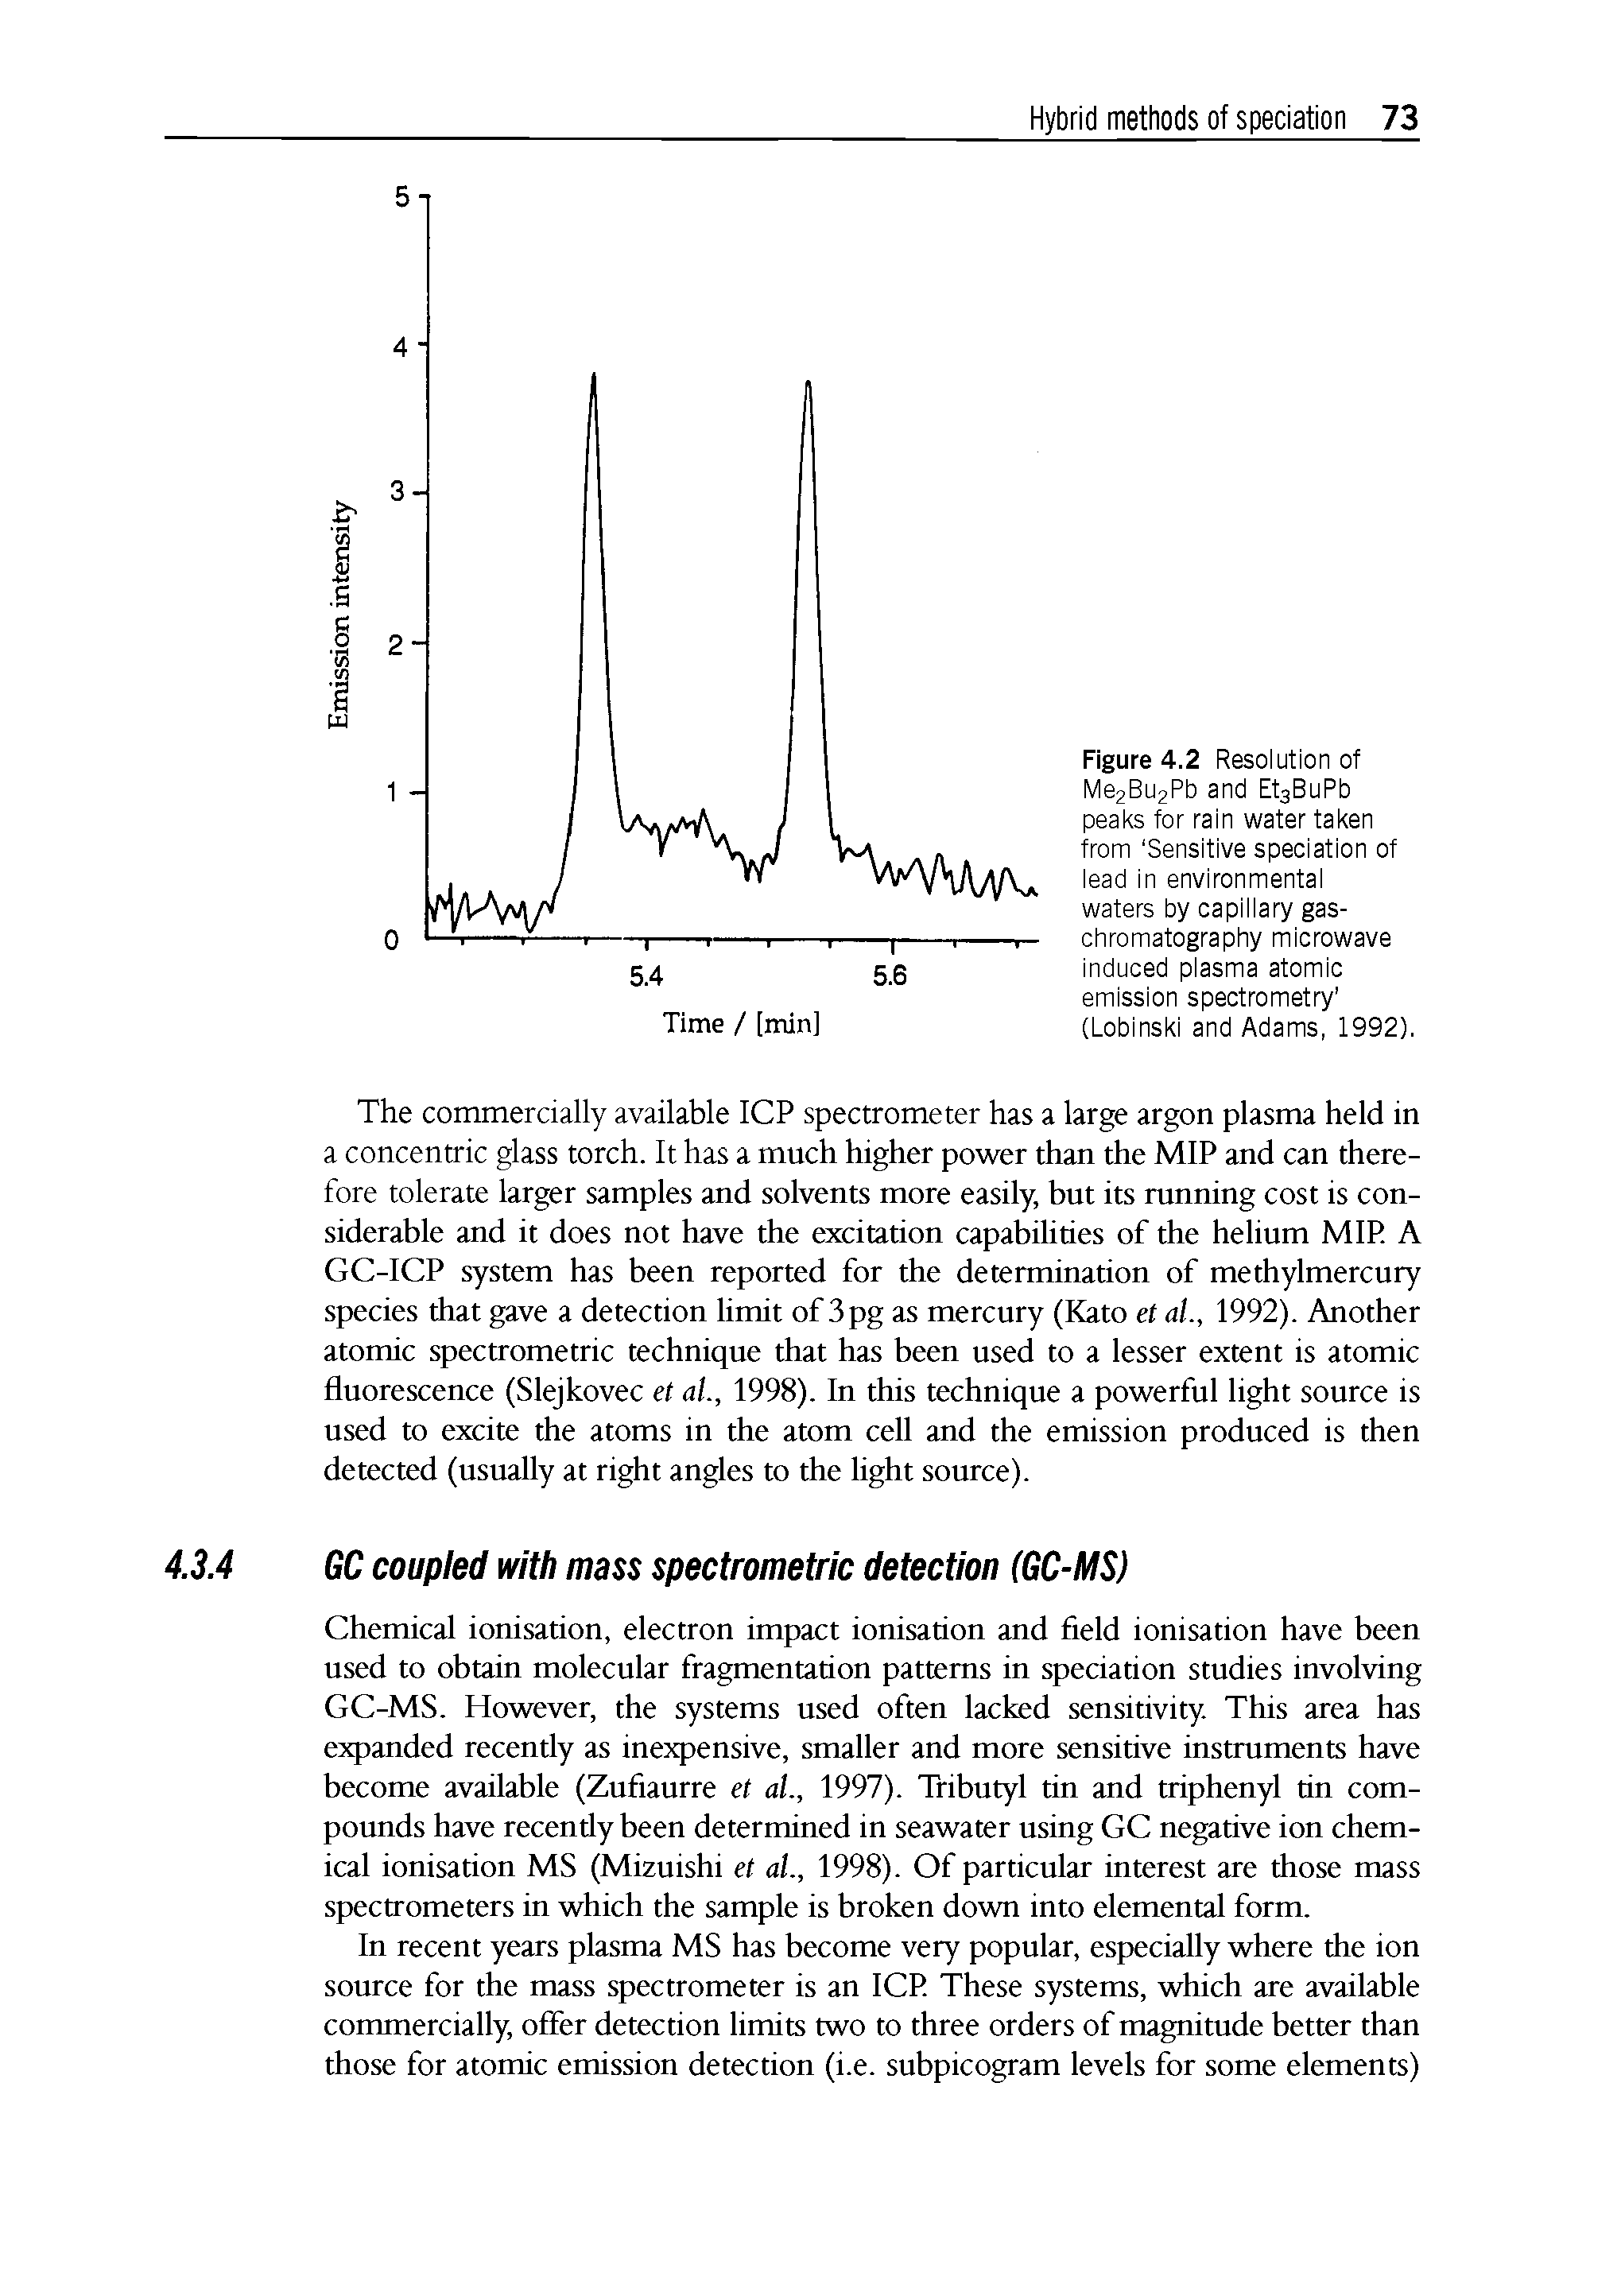 Figure 4.2 Resolution of Me2Bu2Pb and Et3BuPb peaks for rain water taken from Sensitive speciation of lead in environmental waters by capillary gas-chromatography microwave induced plasma atomic emission spectrometry (Lobinski and Adams, 1992).